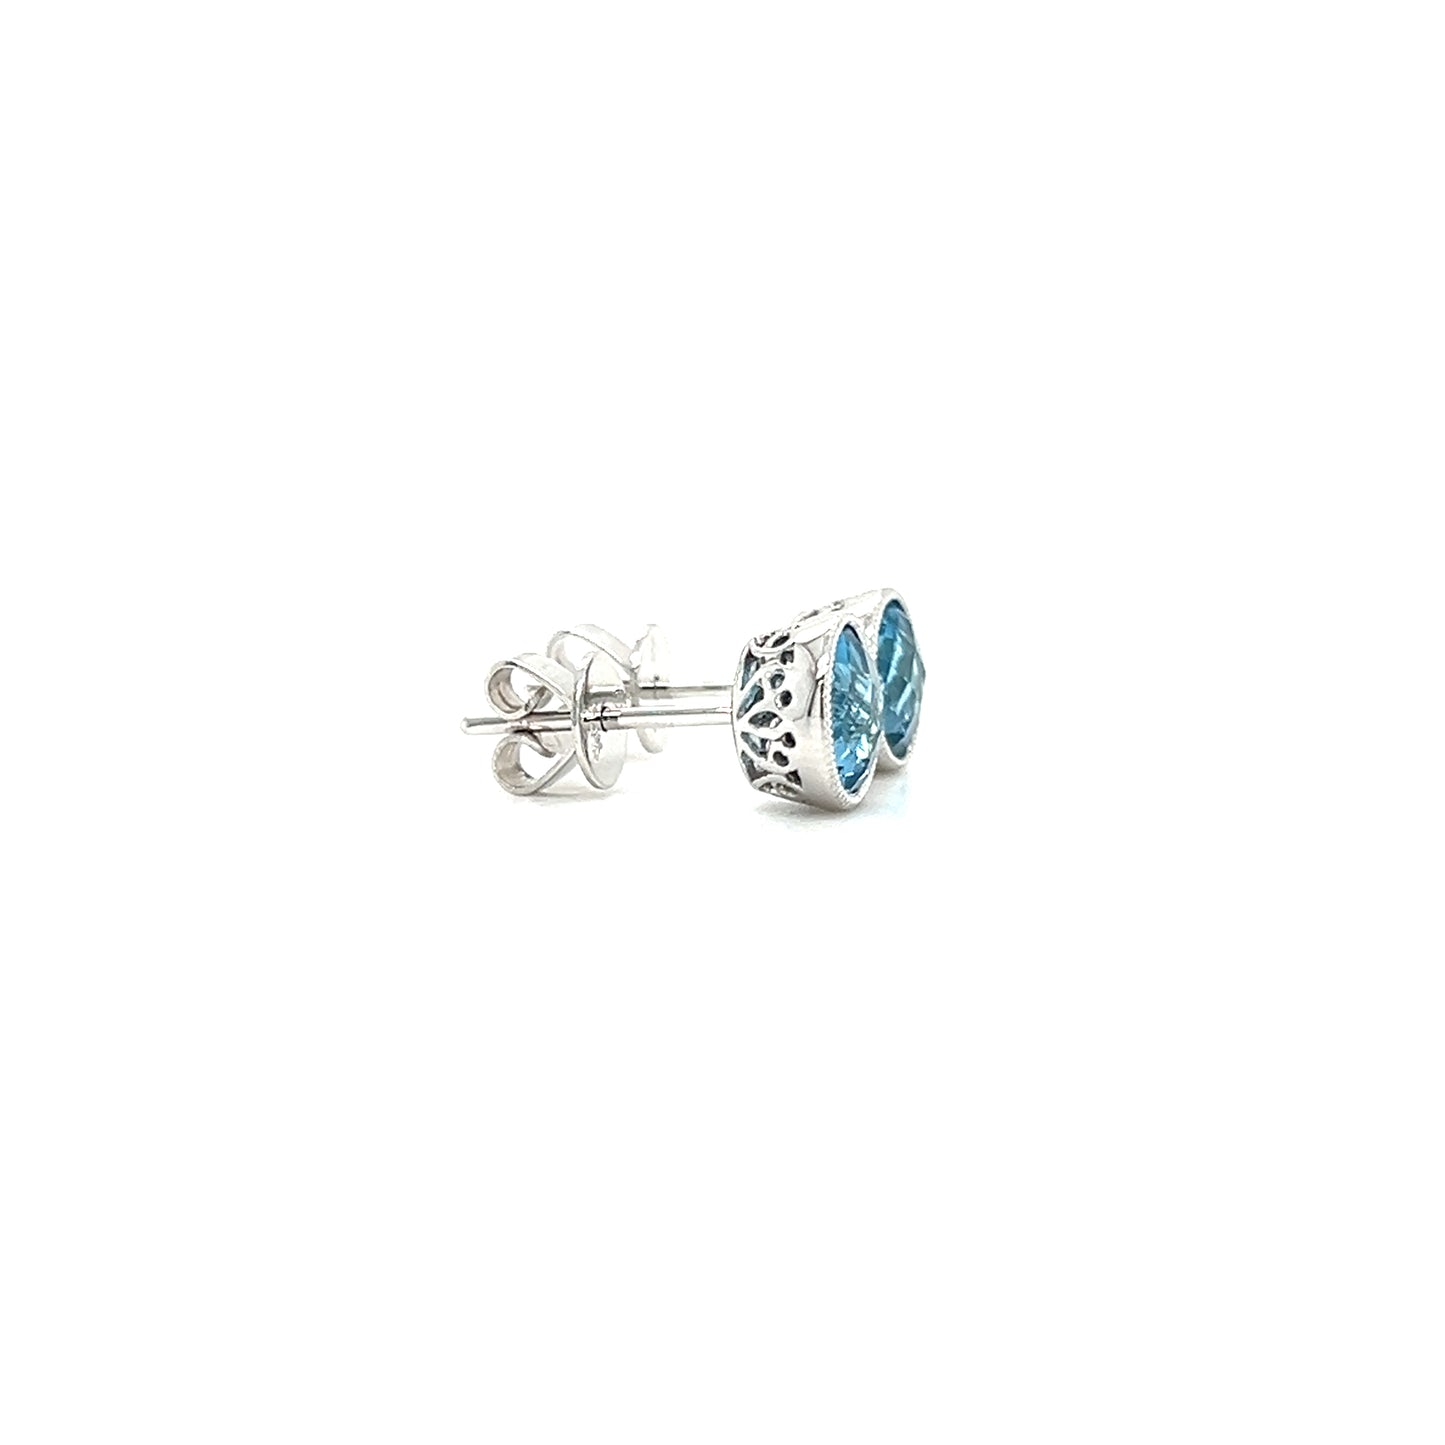 Blue Topaz Stud Earrings with Filigree and Milgrain Details in 14K White Gold Left Profile View